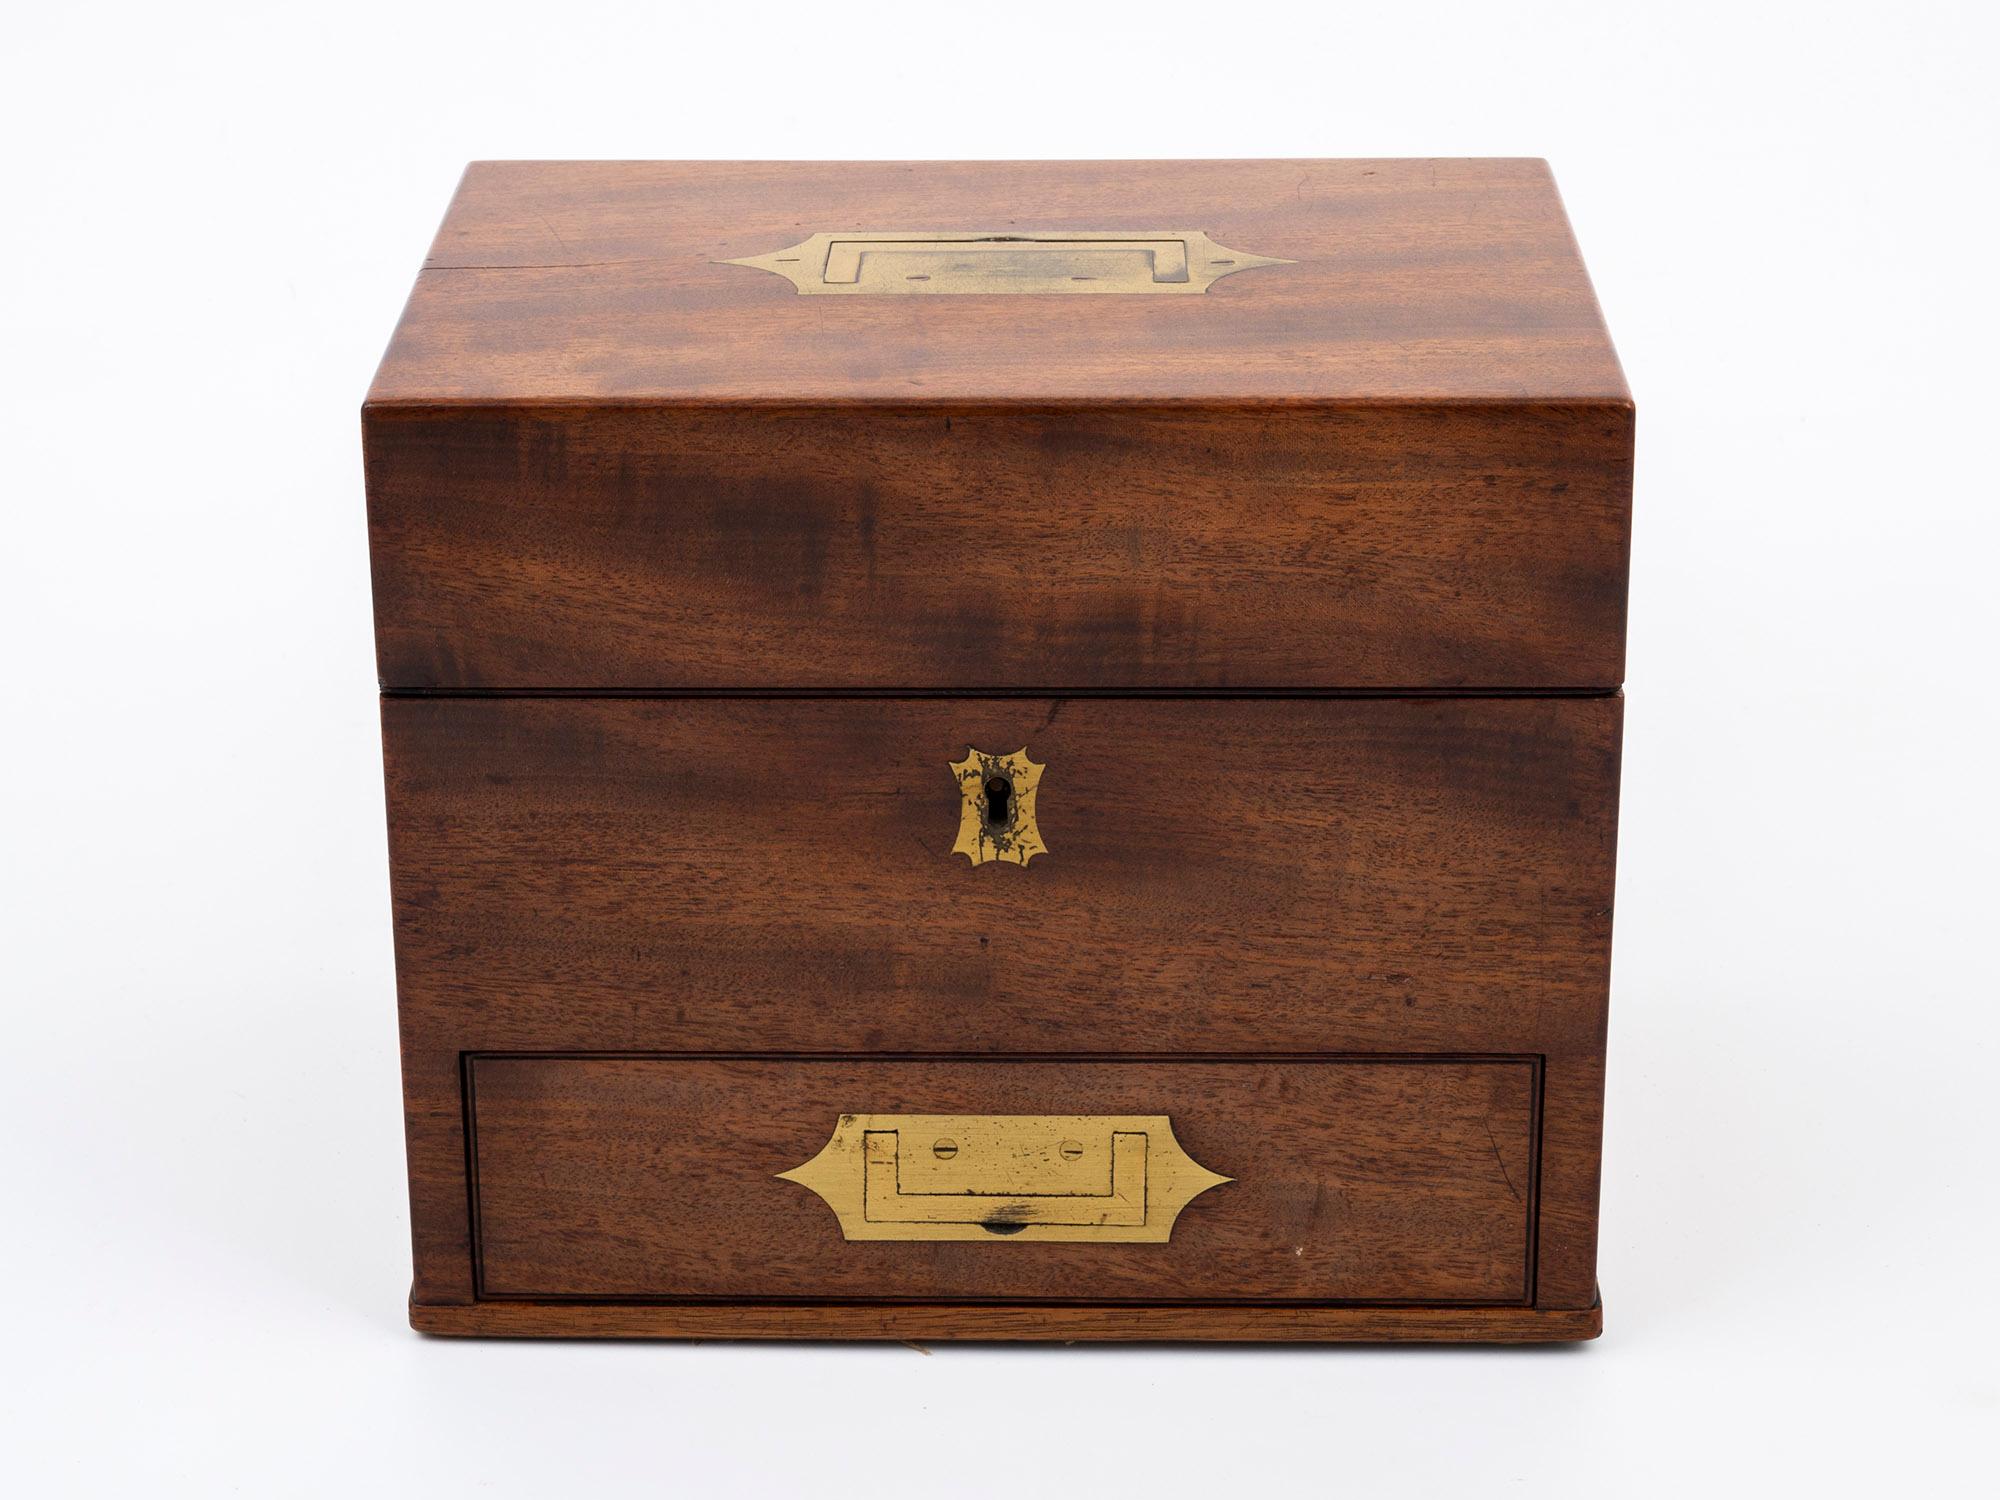 Complete 14 Glass Jars

From our Apothecary collection, we are delighted to offer this Mahogany Apothecary Box. The Apothecary Box of square form made from solid Mahogany with two flush mounted handles one to the bottom drawer and one to the lid and